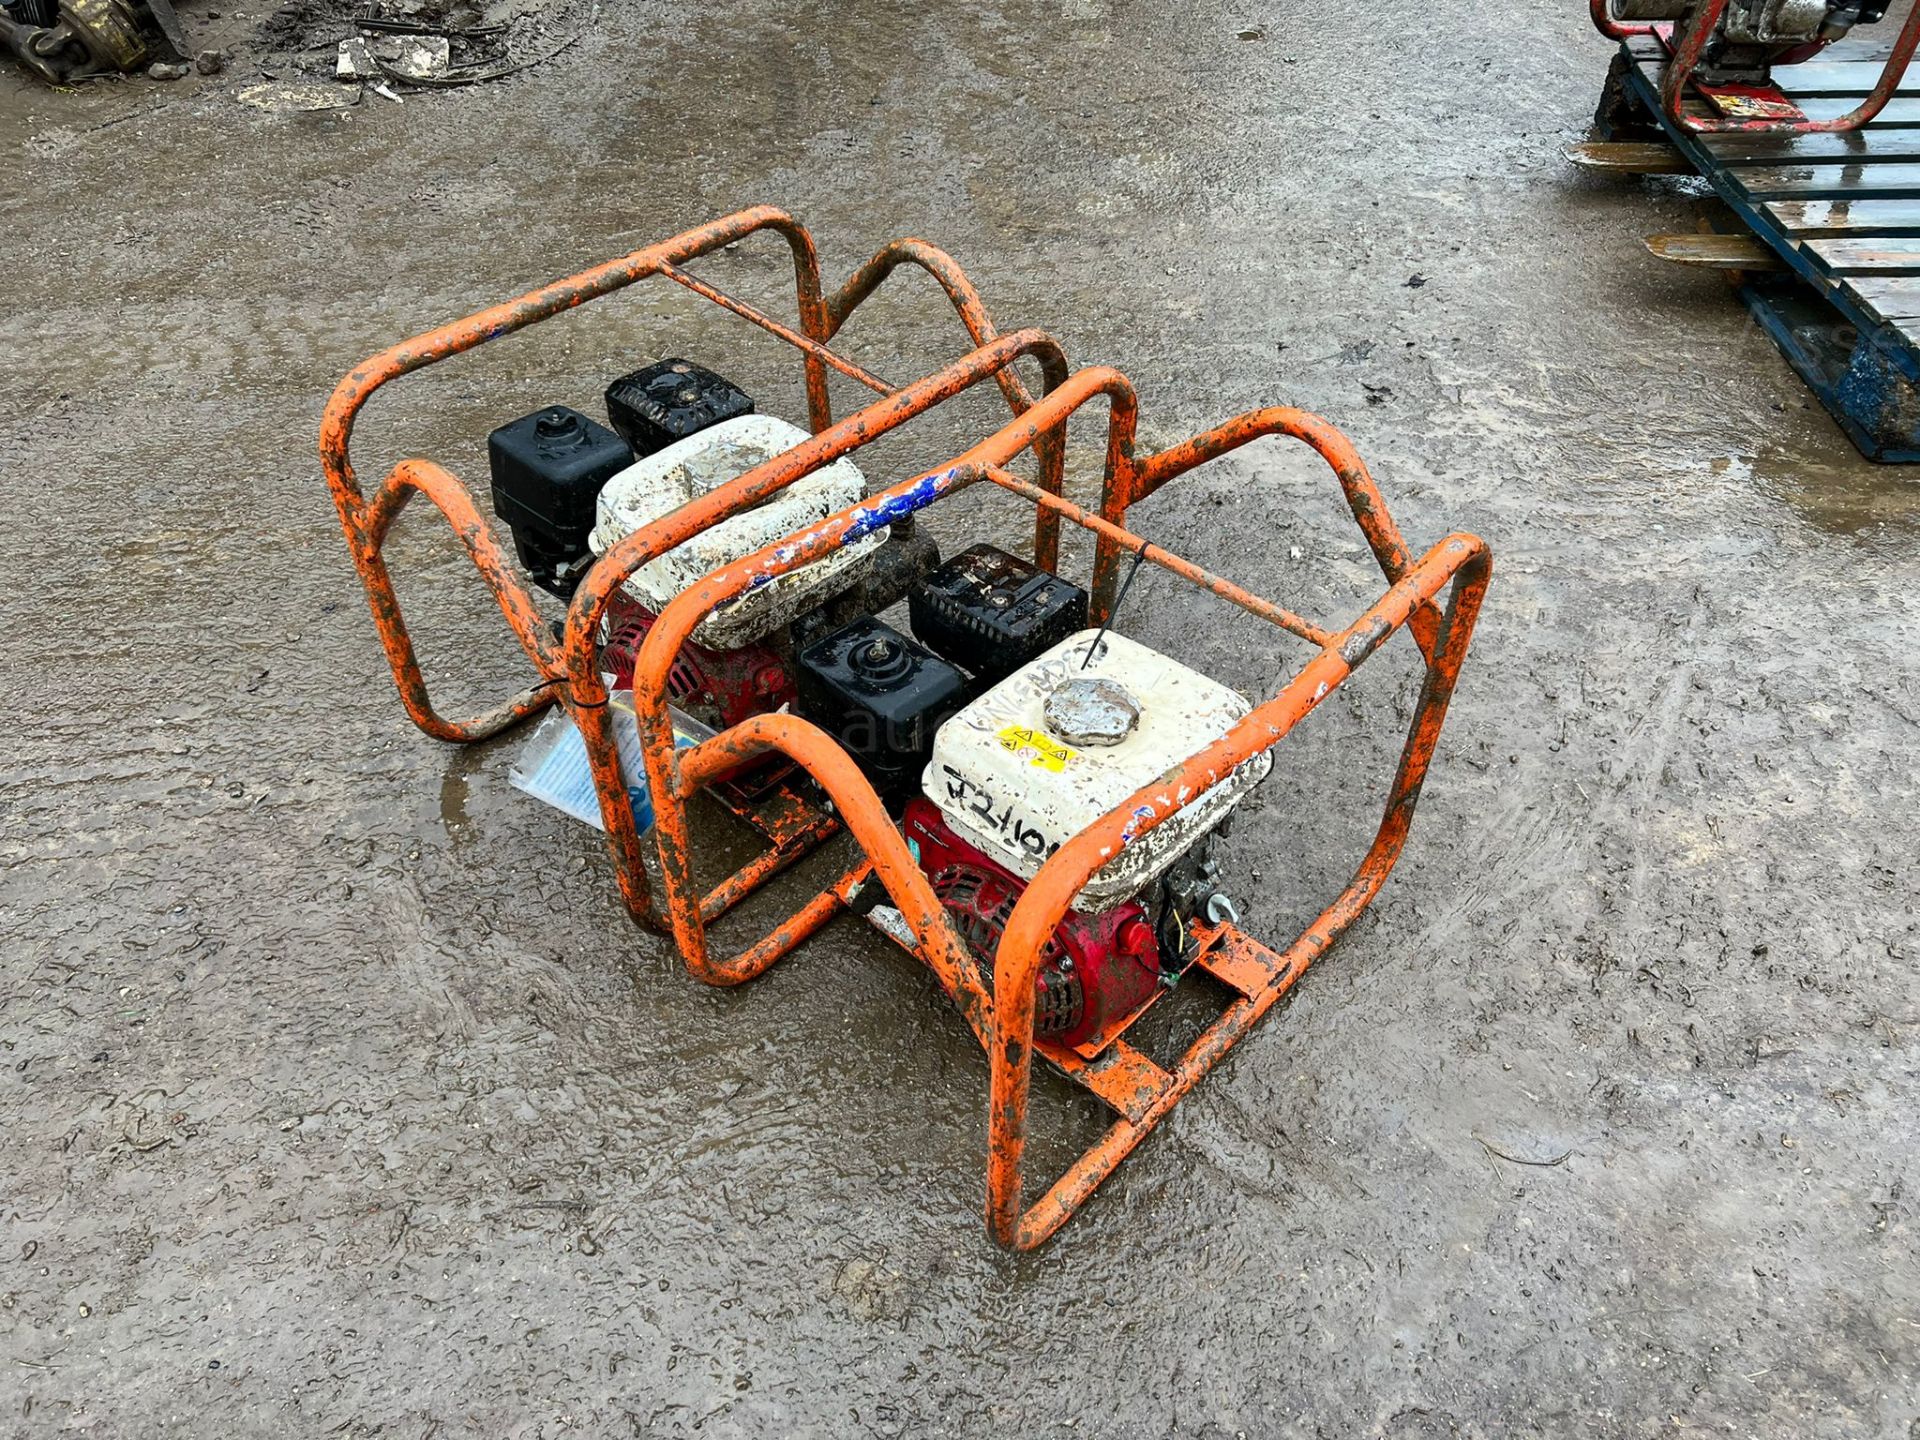 BELLE CONCRETE POKER UNIT, IN WORKING ORDER, HONDA GX160 ENGINE, YOU ARE BIDDING FOR 1 *PLUS VAT* - Image 2 of 8